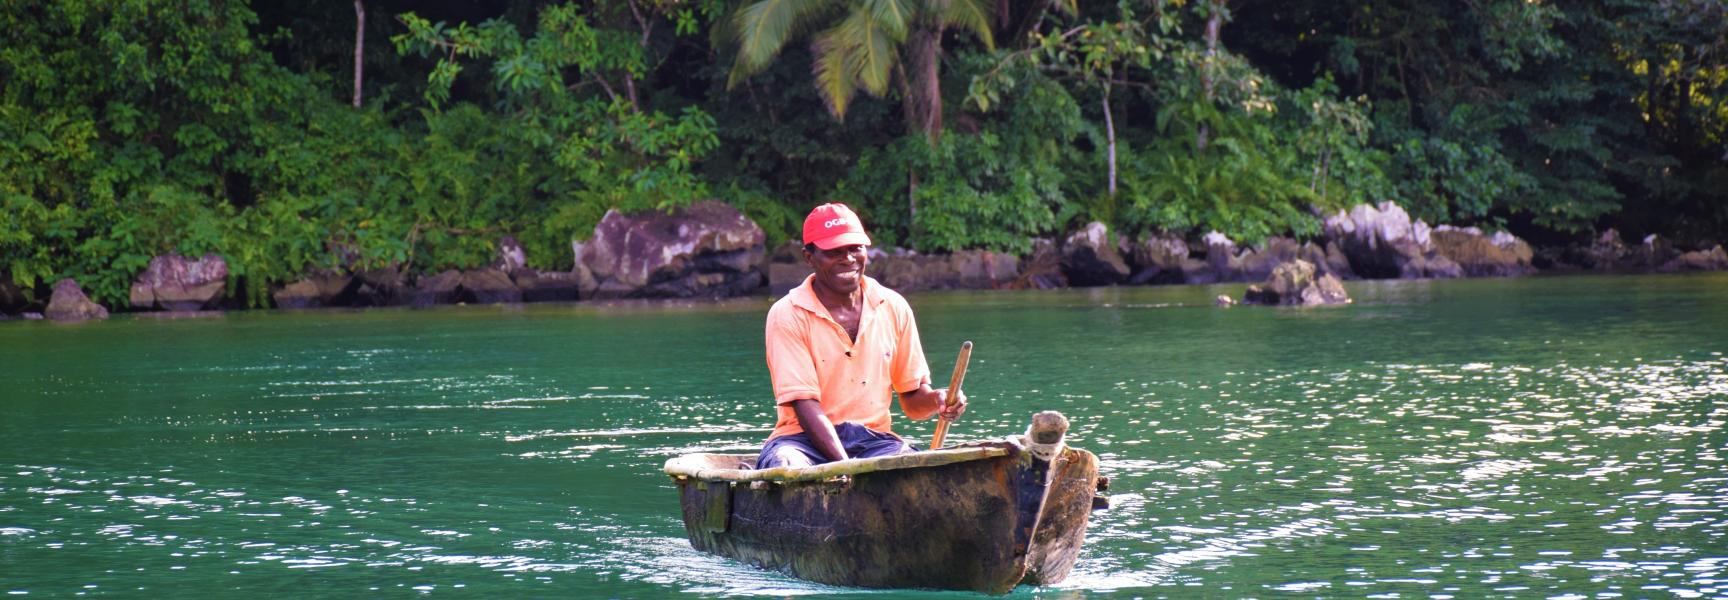 A man on a small boat in Sao Tome and Principe